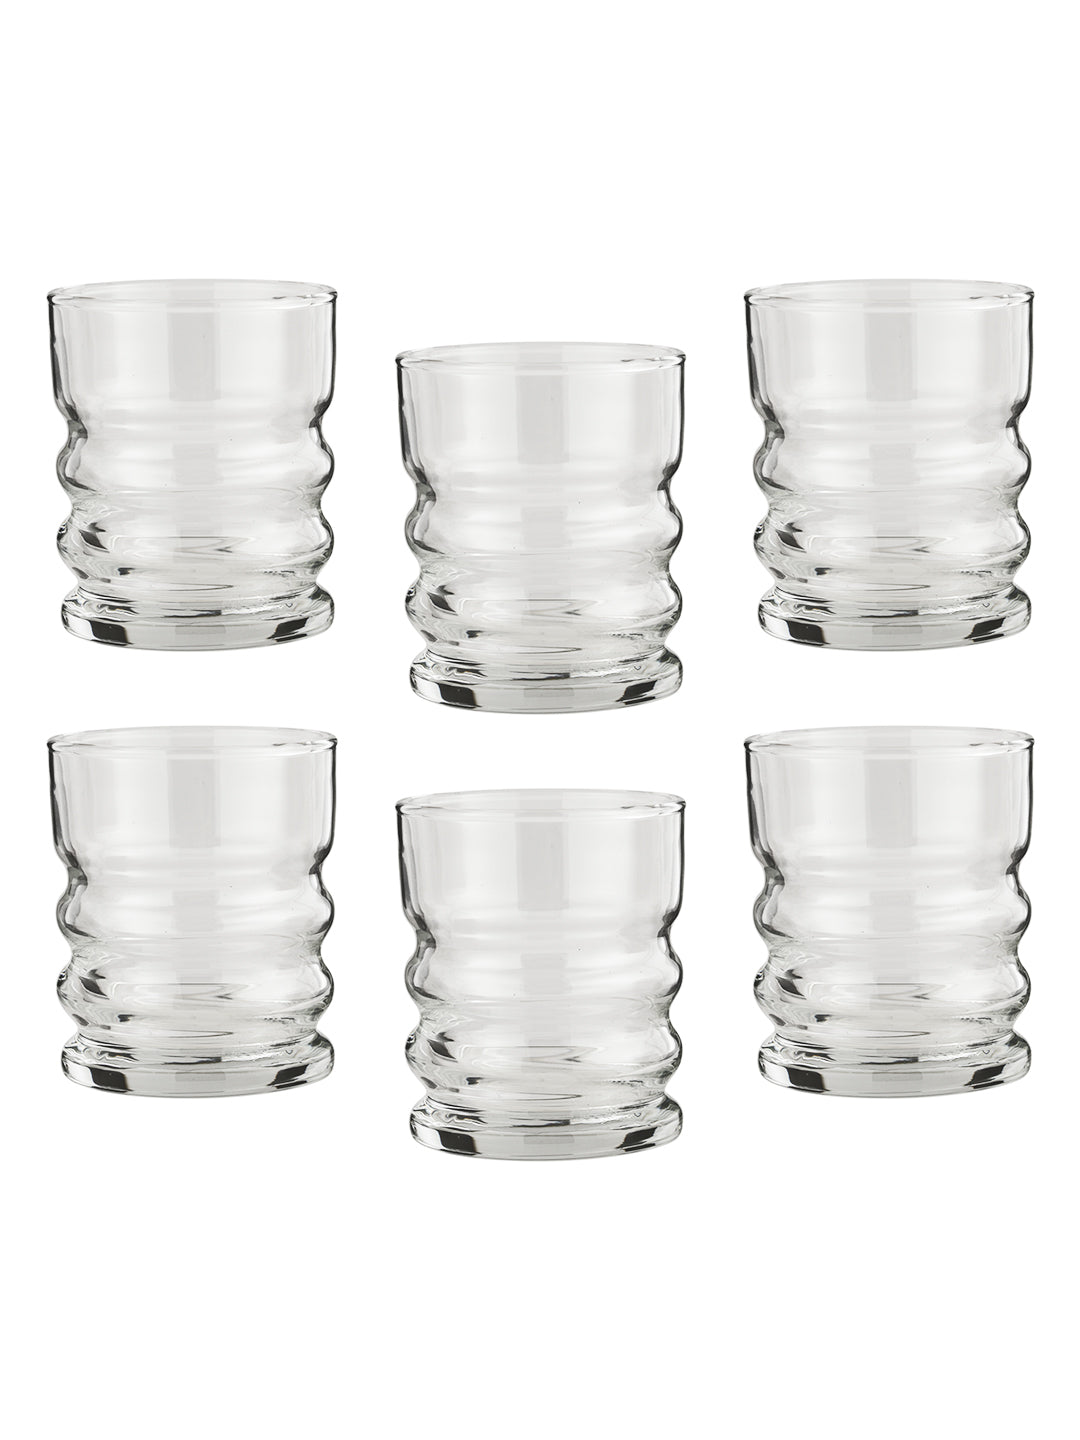 RINGS OF POWER WHISKEY GLASS - CRAFTED IN EUROPE – SET OF 6